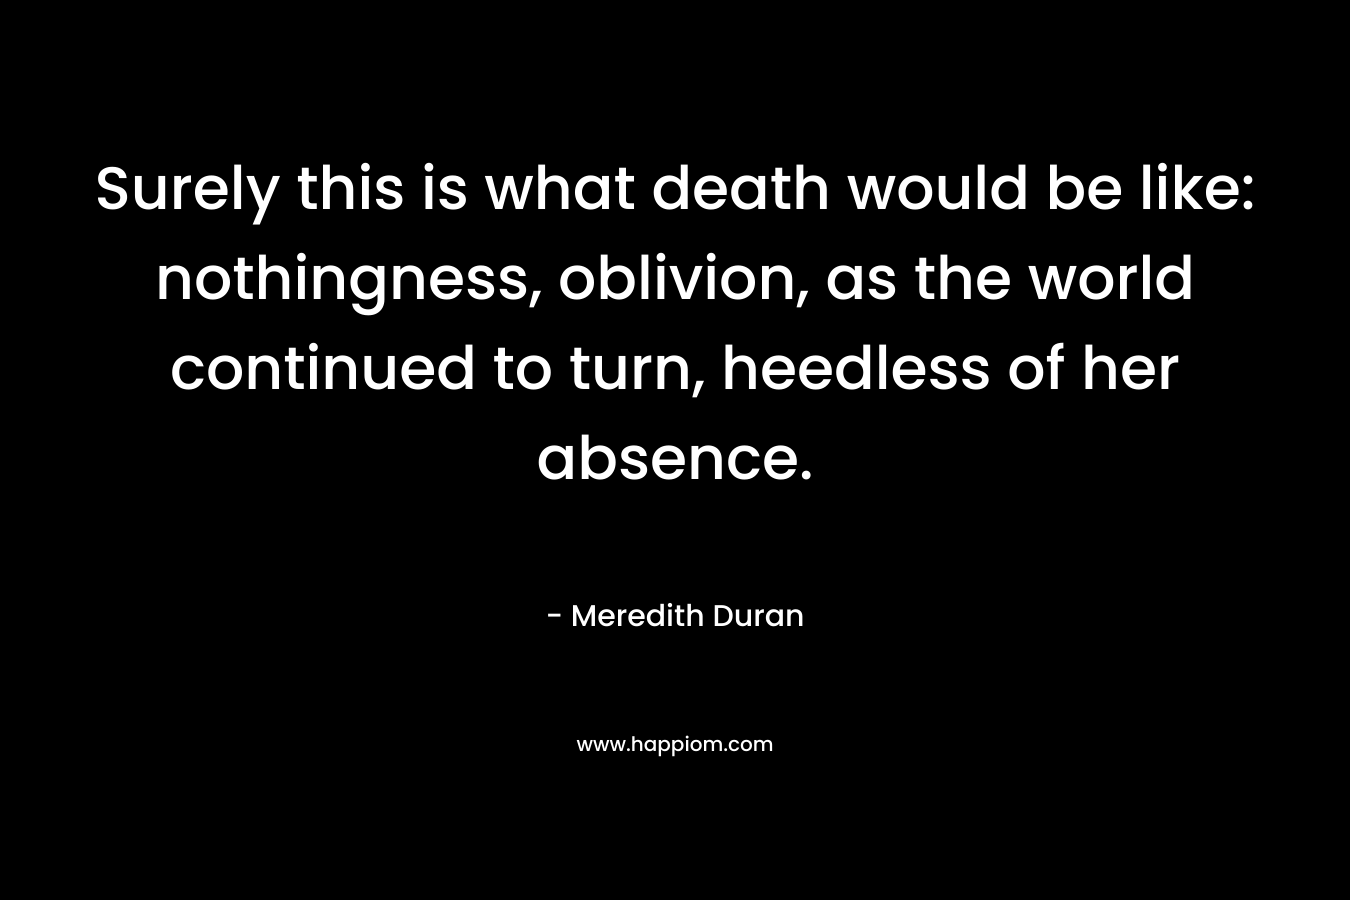 Surely this is what death would be like: nothingness, oblivion, as the world continued to turn, heedless of her absence. – Meredith Duran